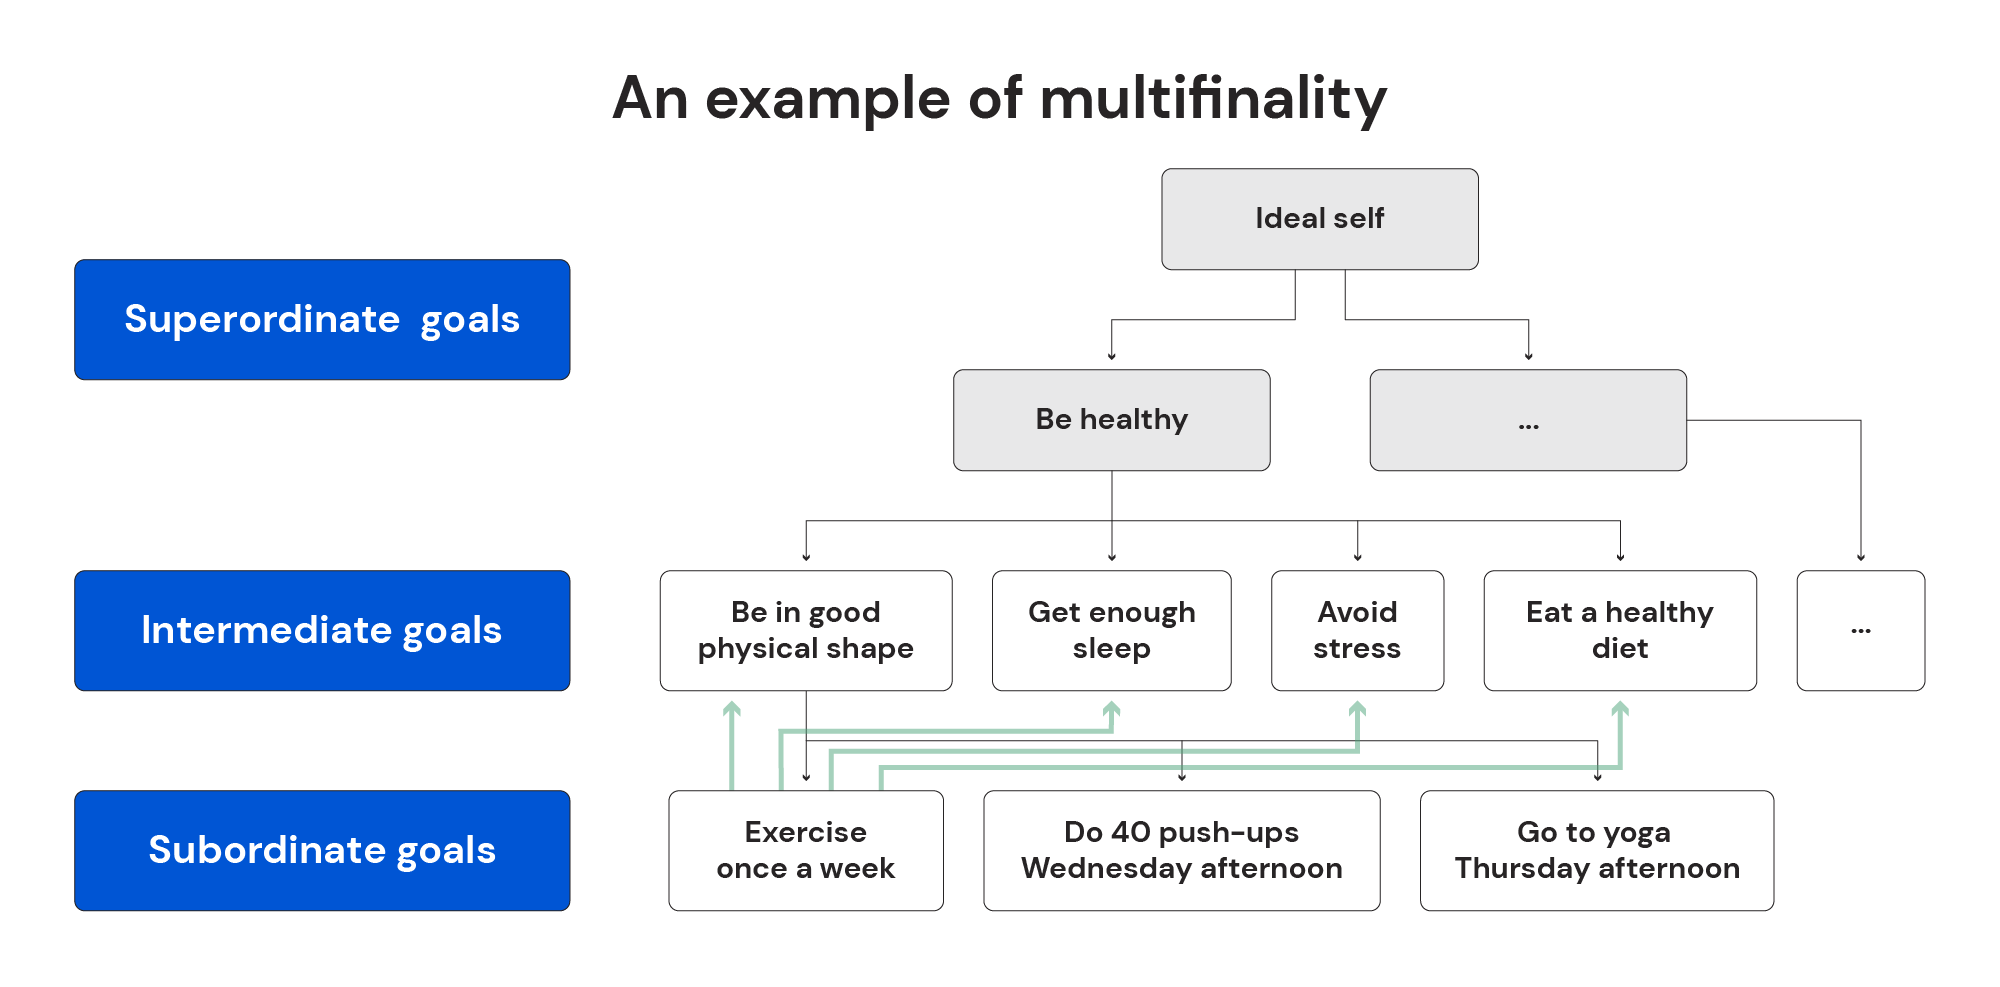 An example of multifinality